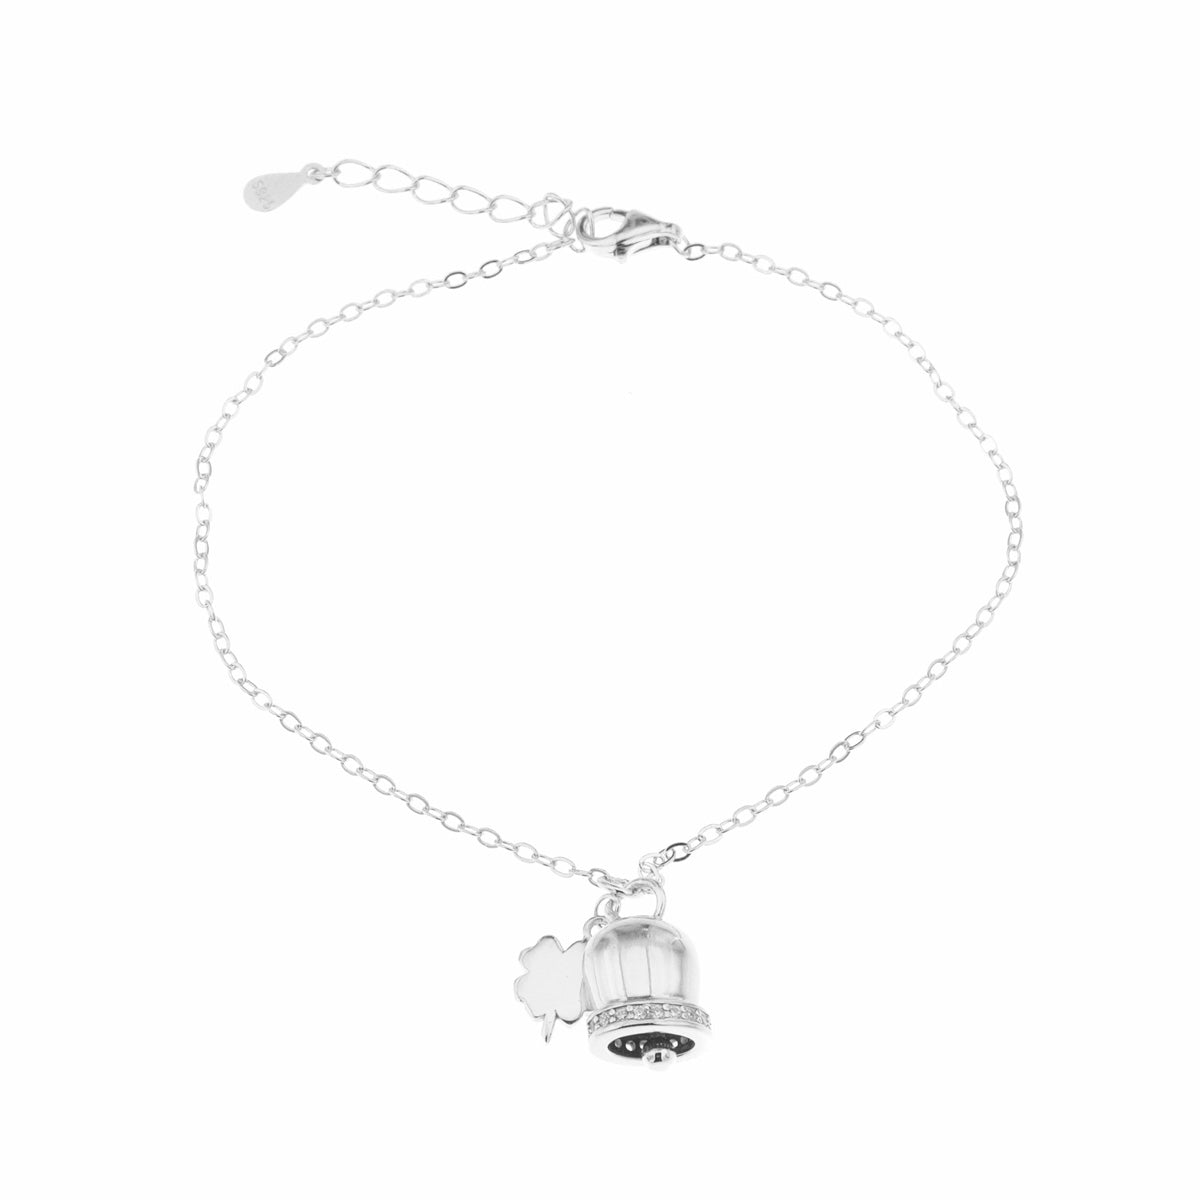 925 silver bracelet with charming bell and four -leaf clover